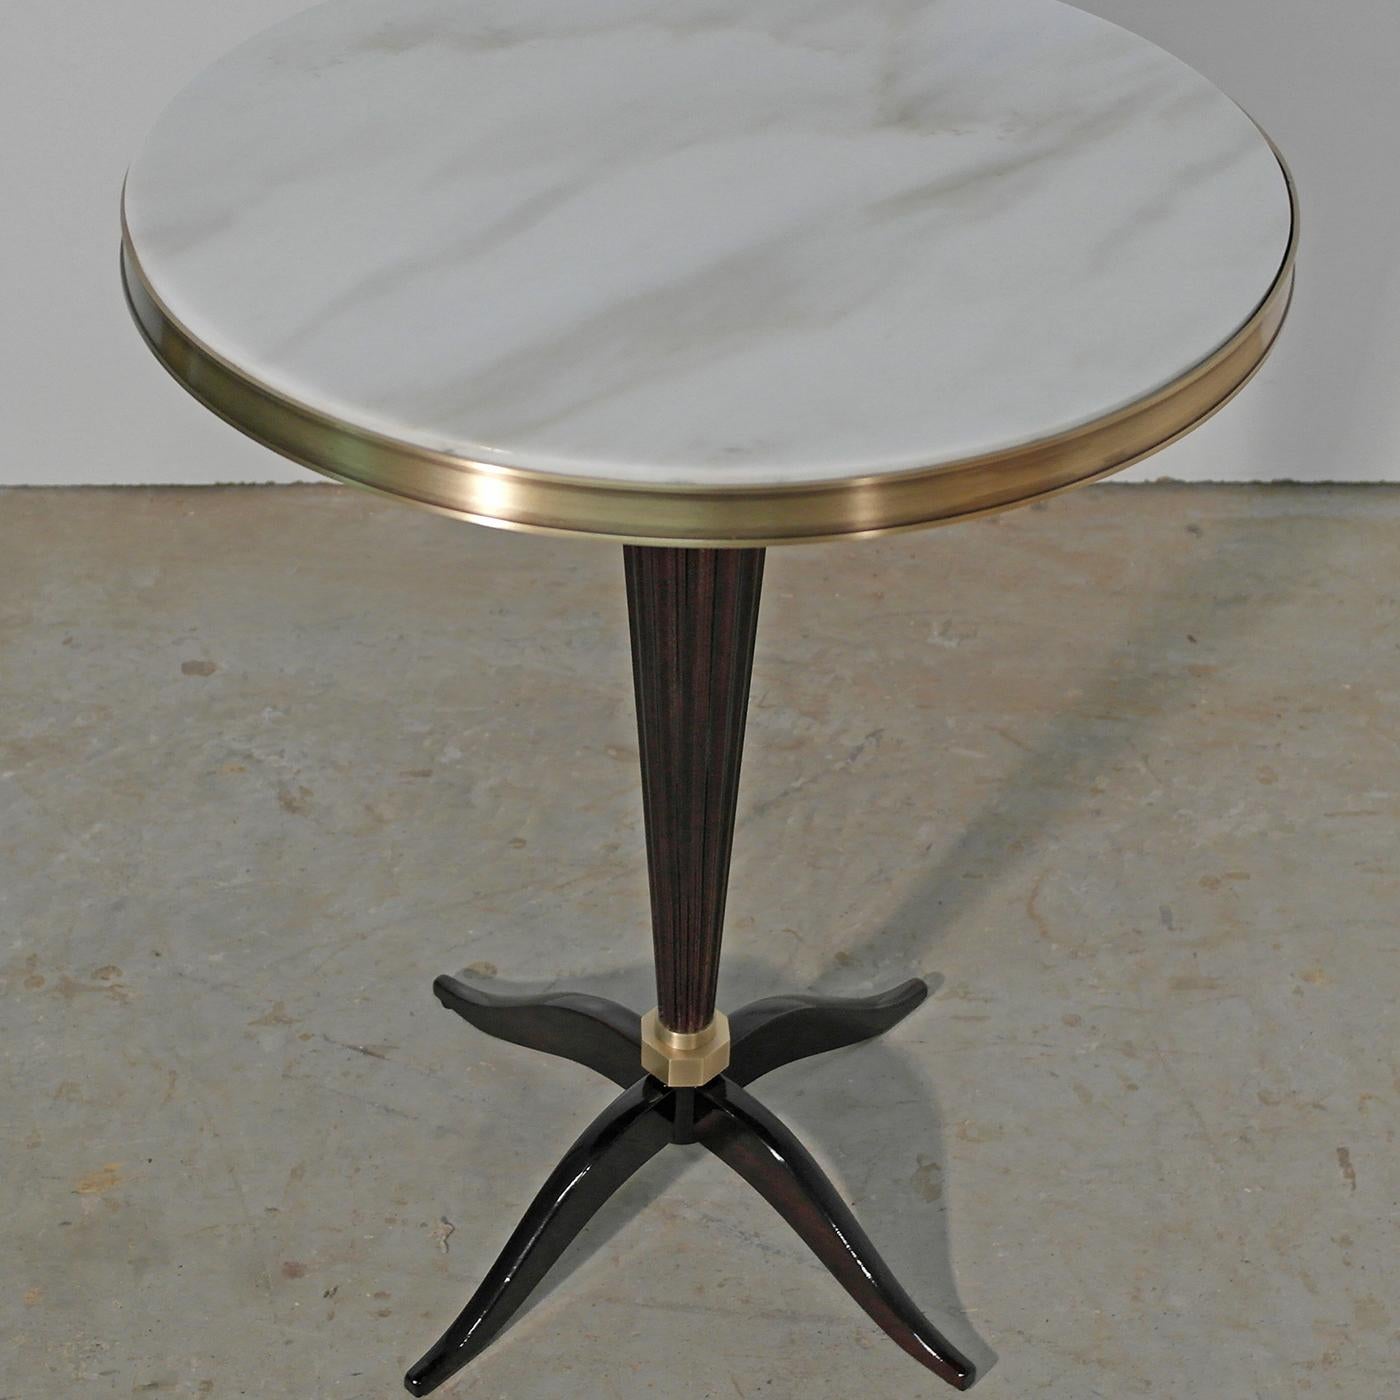 This round side table is crafted from solid wood. Its glossy rosewood-stained finish brings a warm feel to any room, enhanced with brass accents with a brushed bronze finish. Finished with a Calacatta marble top, the black gloss round side table